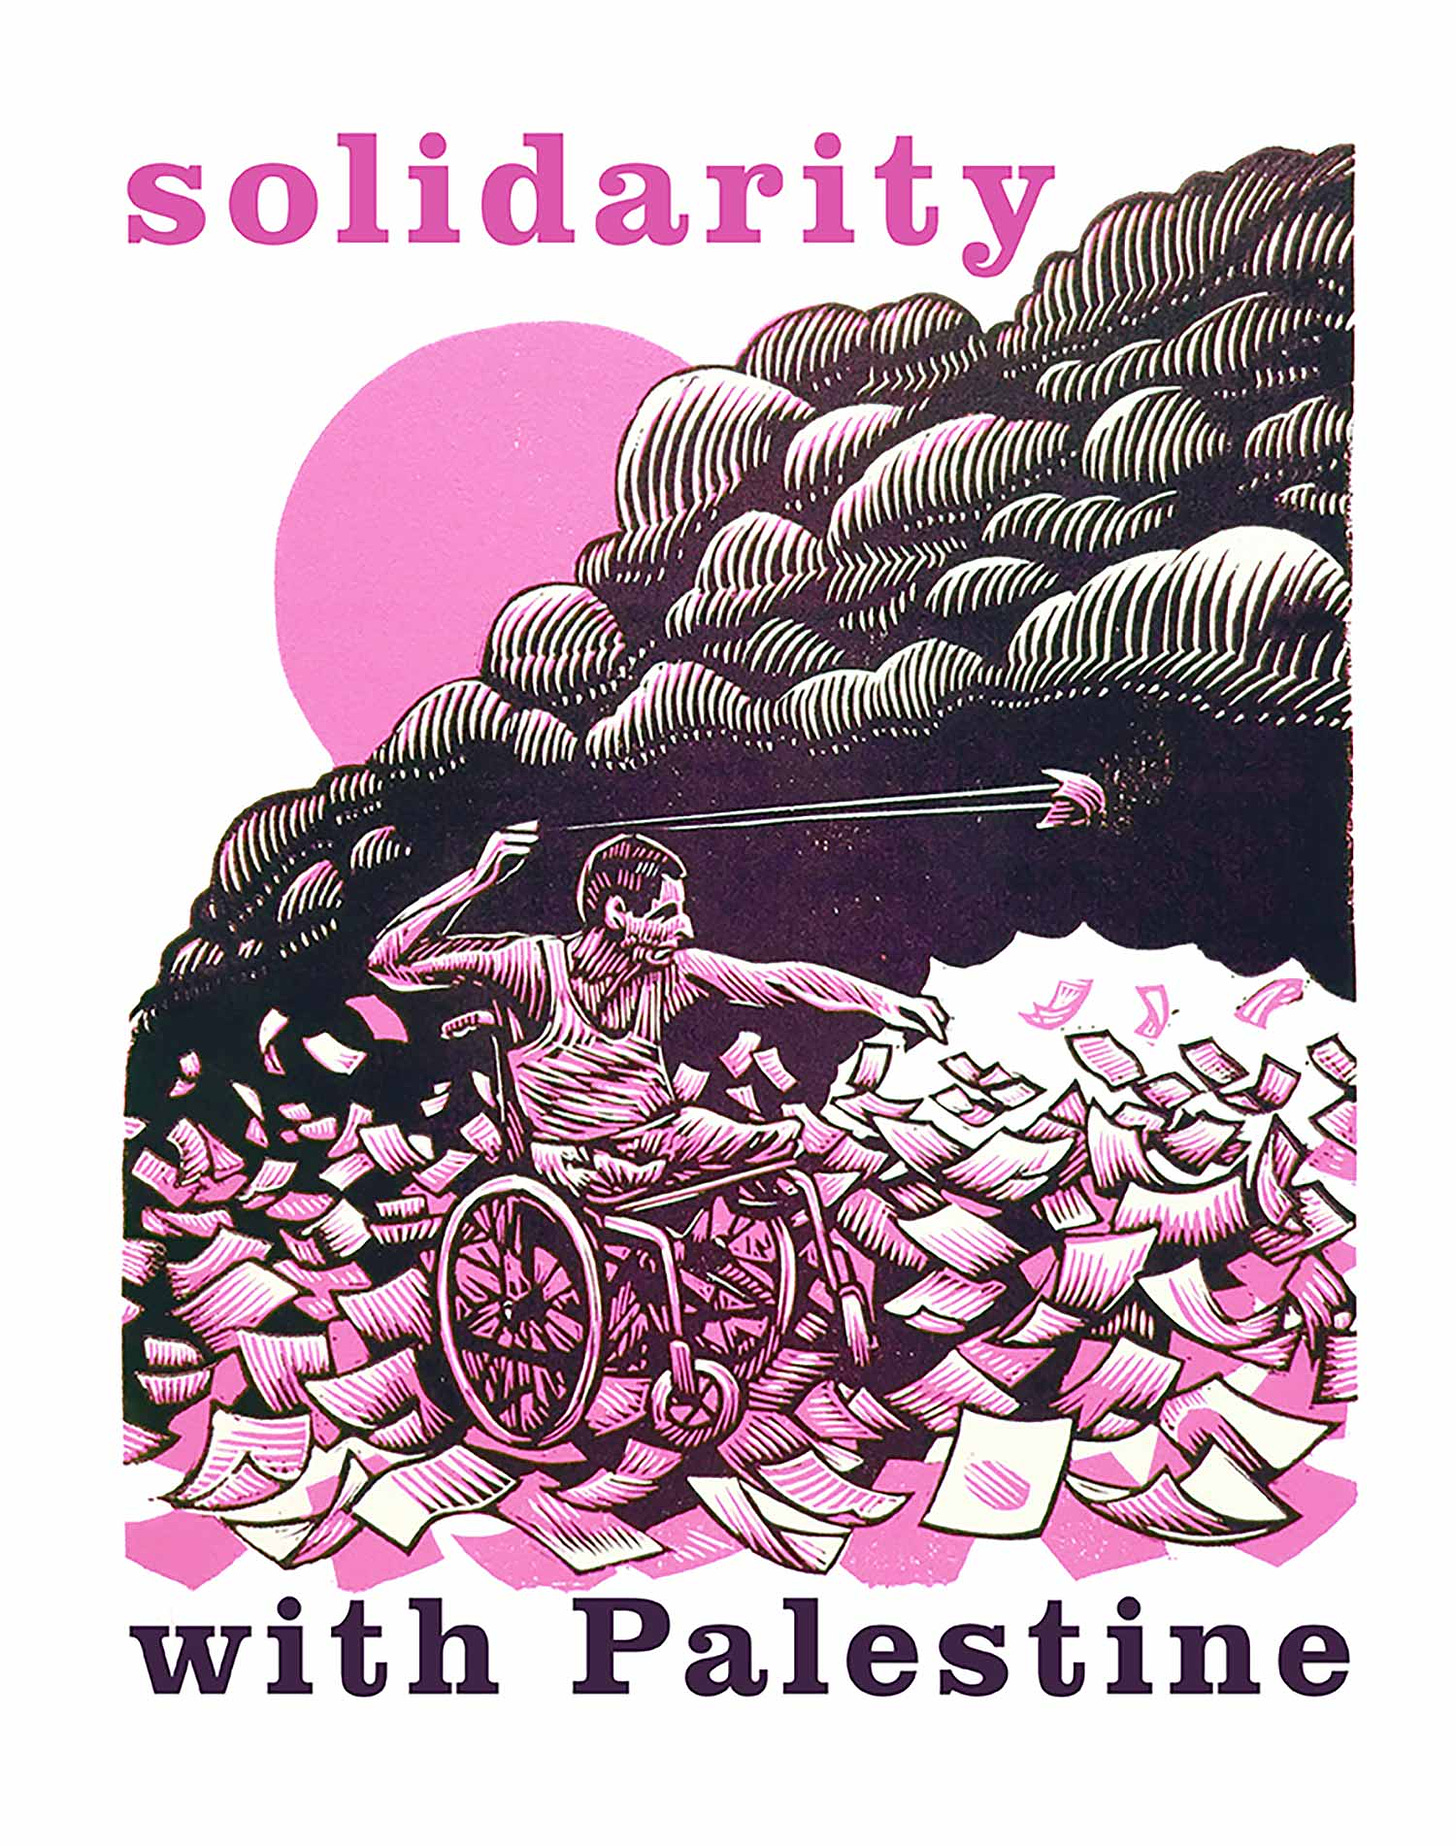 The text, “Solidarity with Palestine,” frames a scene of a man in a wheelchair. He is launching a slingshot amidst a backdrop of scattered papers and a large plume of smoke. A large sun sets behind the clouds of smoke.